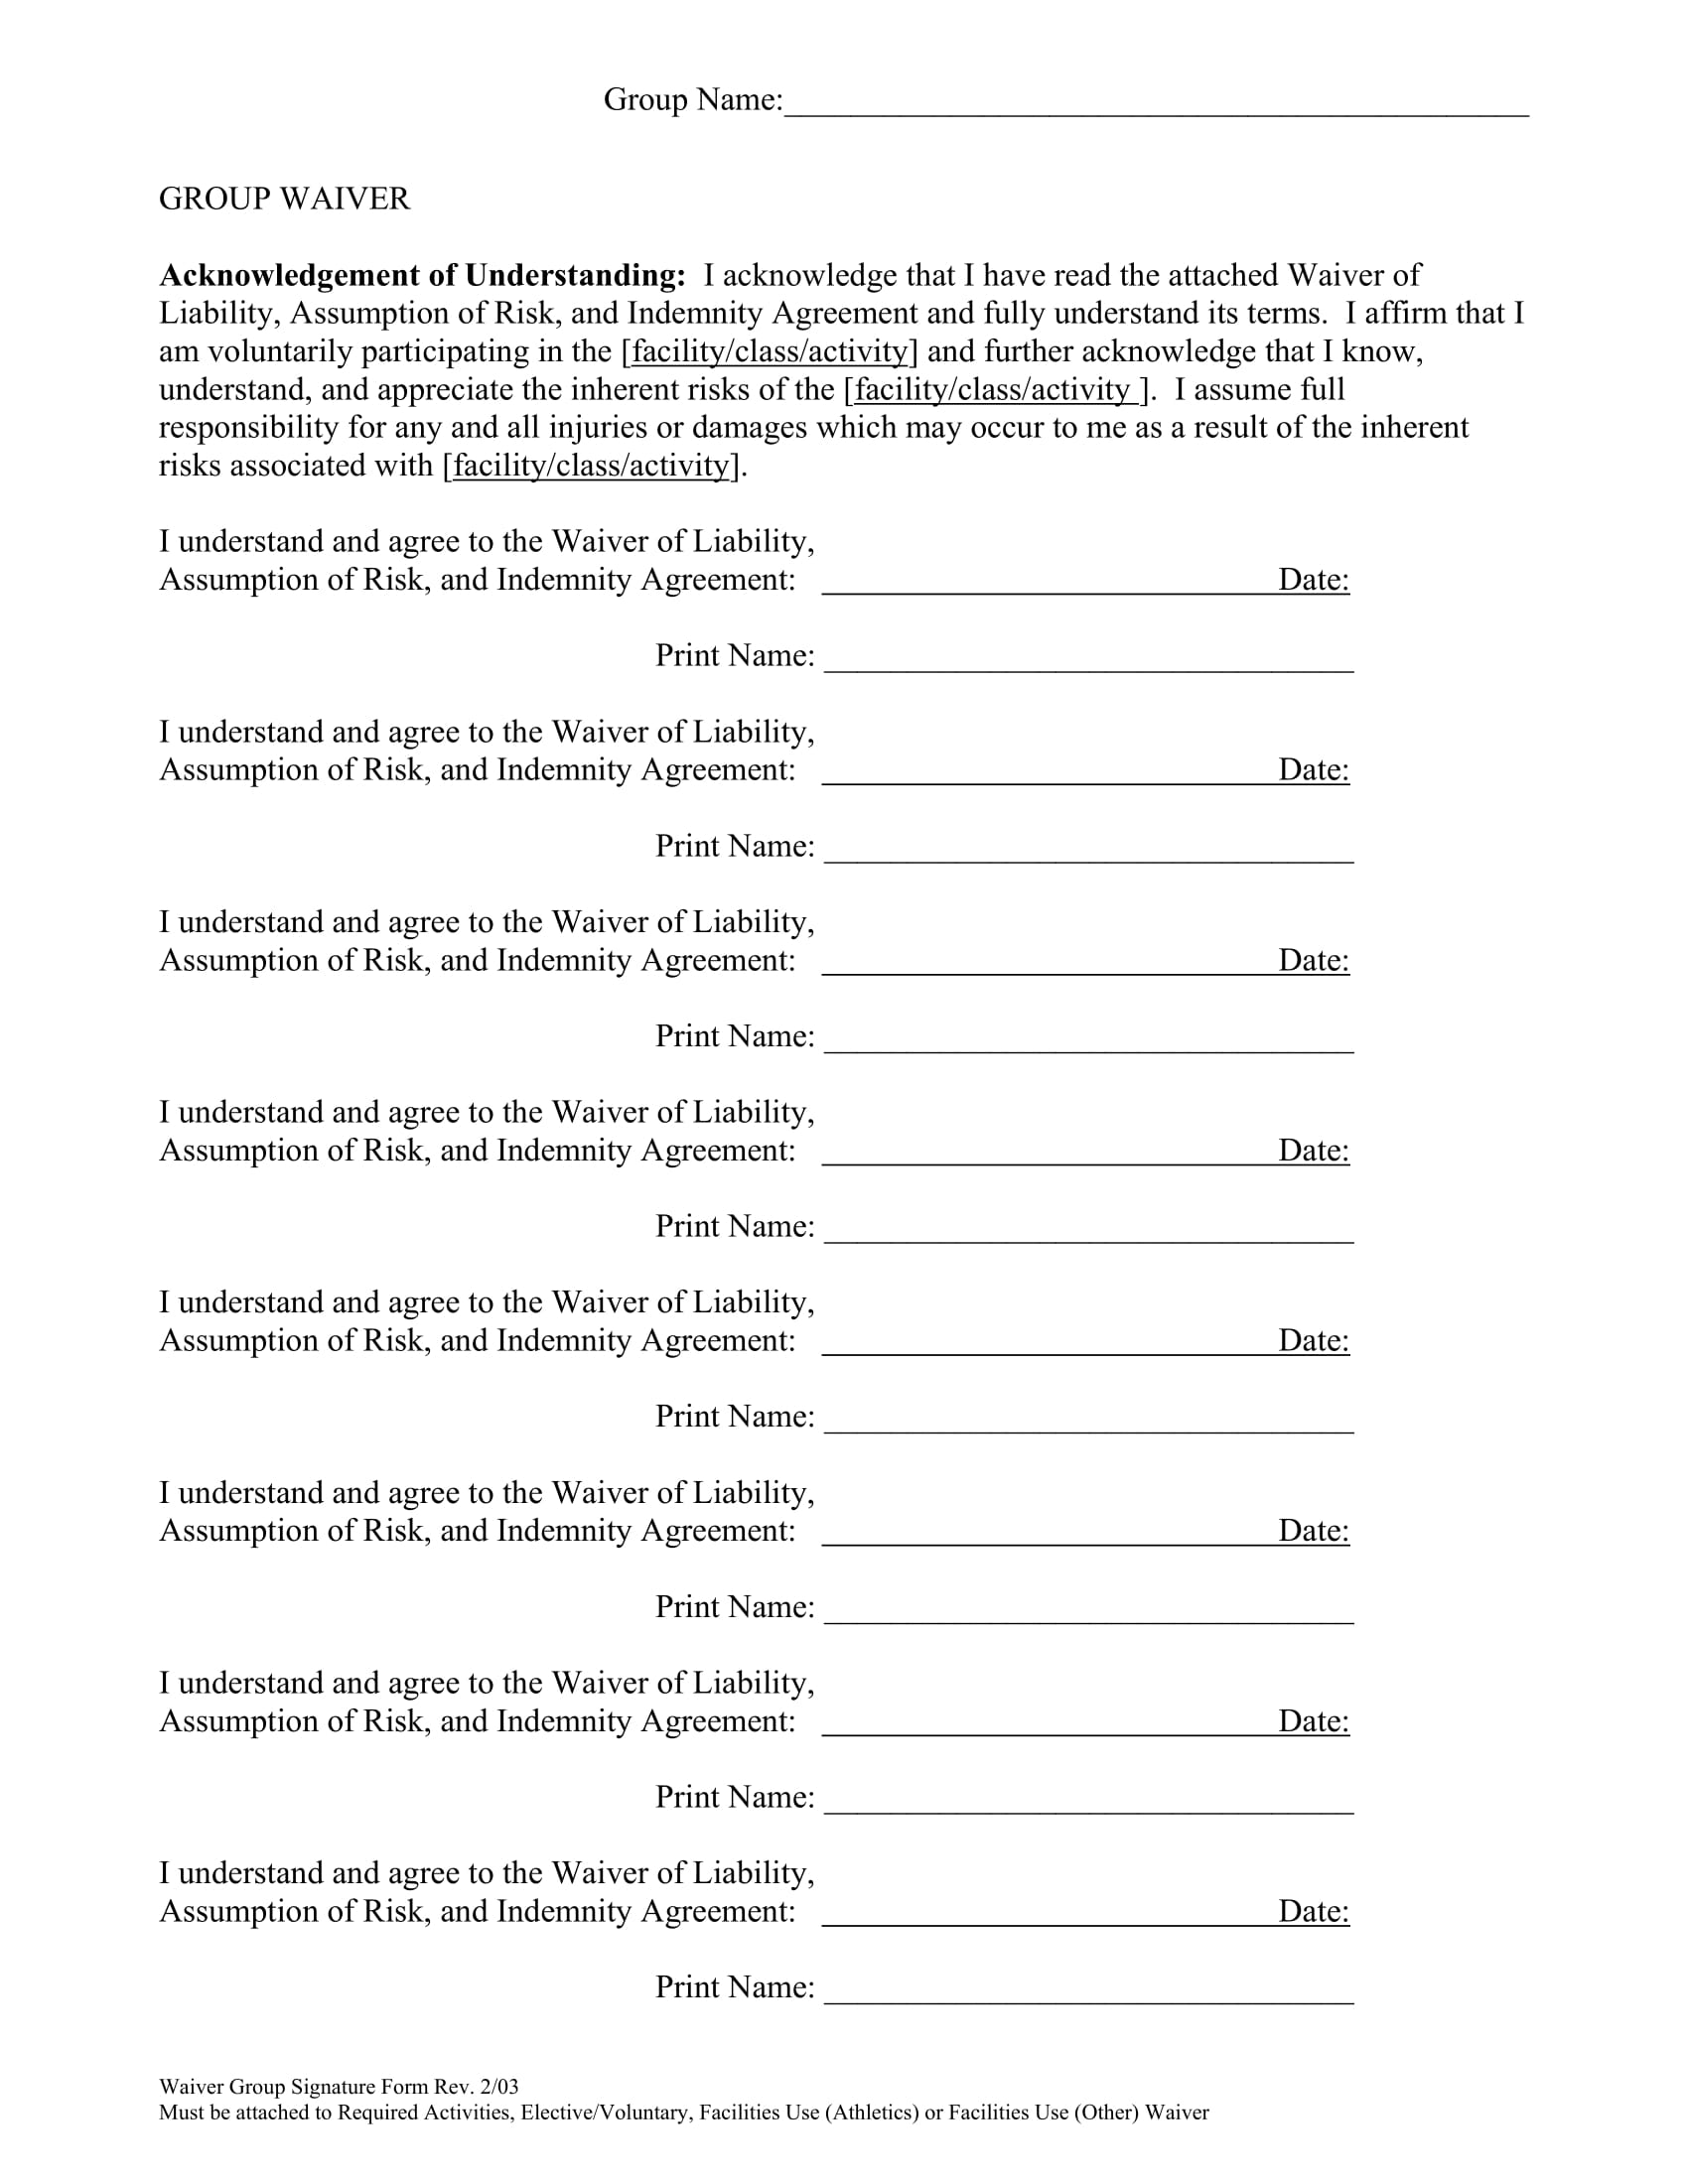 waiver of liability form for group 1